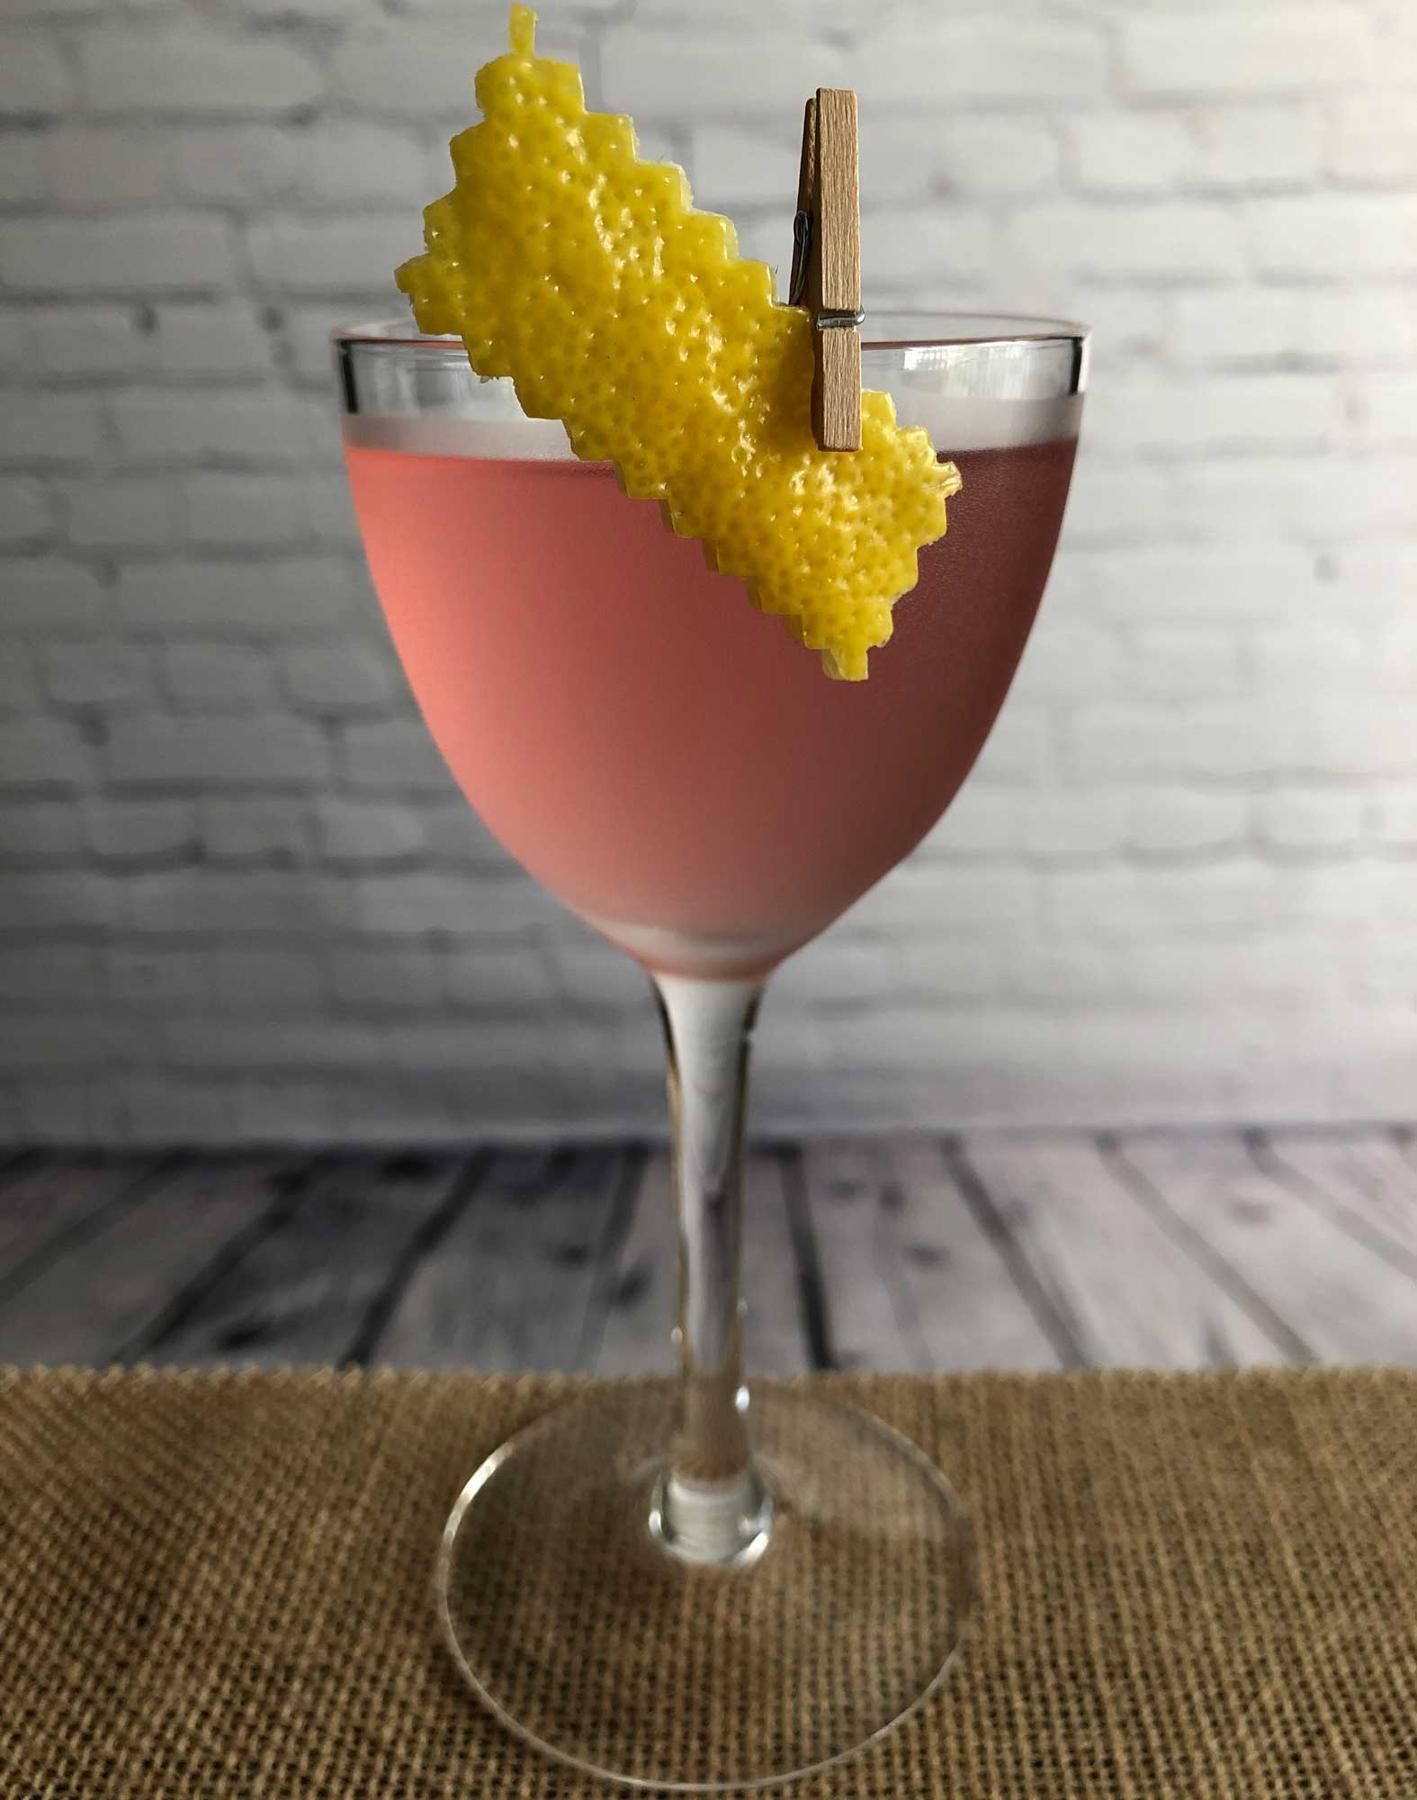 An example of the Atta Boy Cocktail, the mixed drink (drink), by Savoy Cocktail Book, featuring Hayman’s London Dry Gin, Dolin Dry Vermouth de Chambéry, grenadine, and lemon twist; photo by Lee Edwards